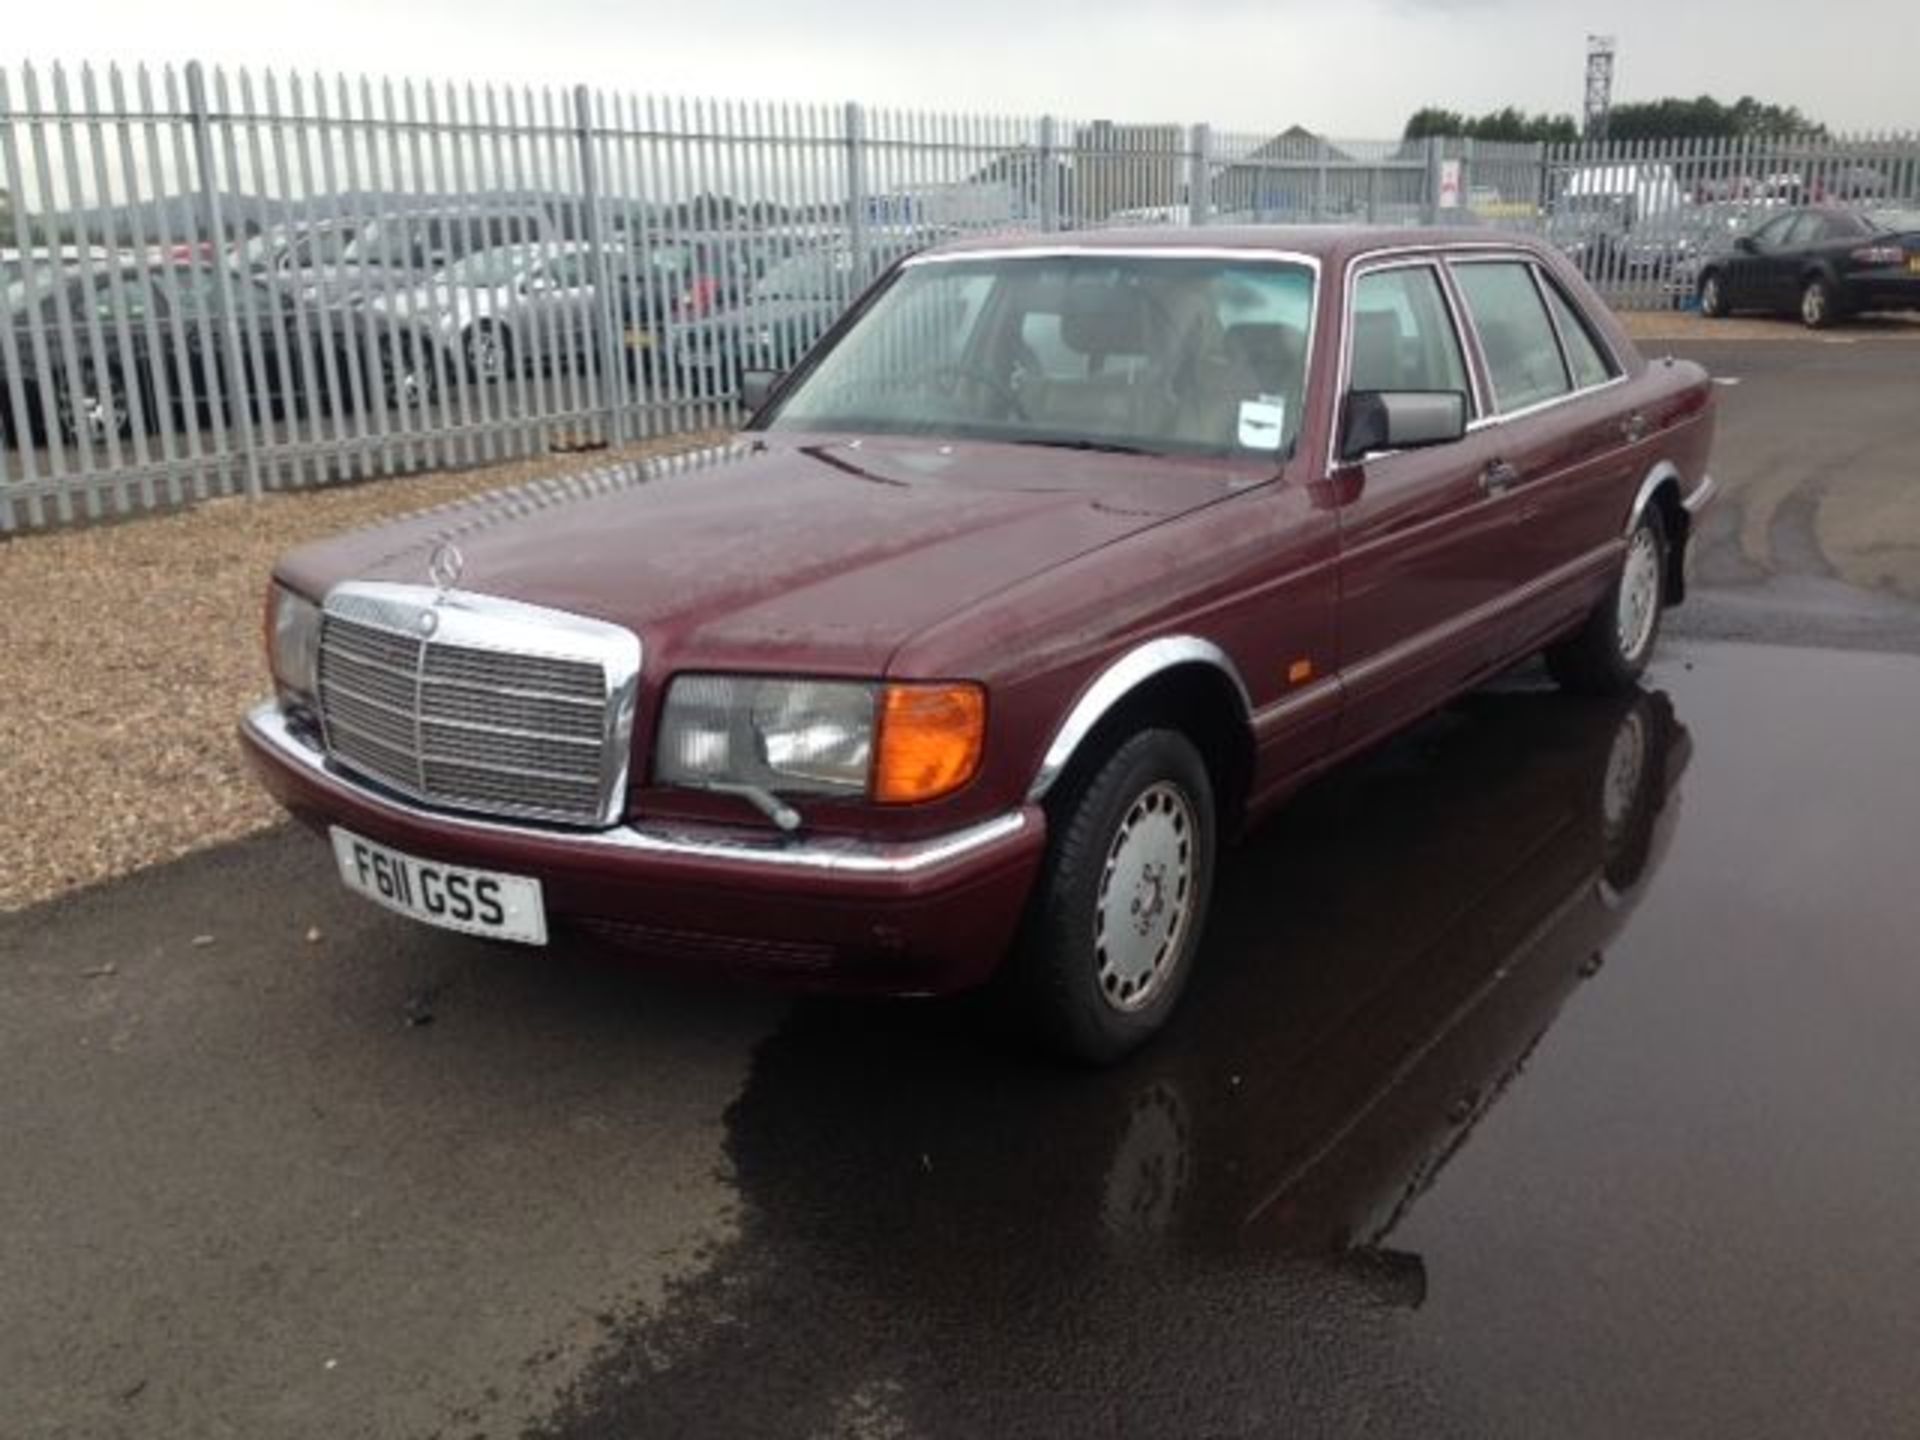 MERCEDES, 420 SEL AUTO - 4196cc, Chassis number WDB1260352A439079 - this two recorded keeper example